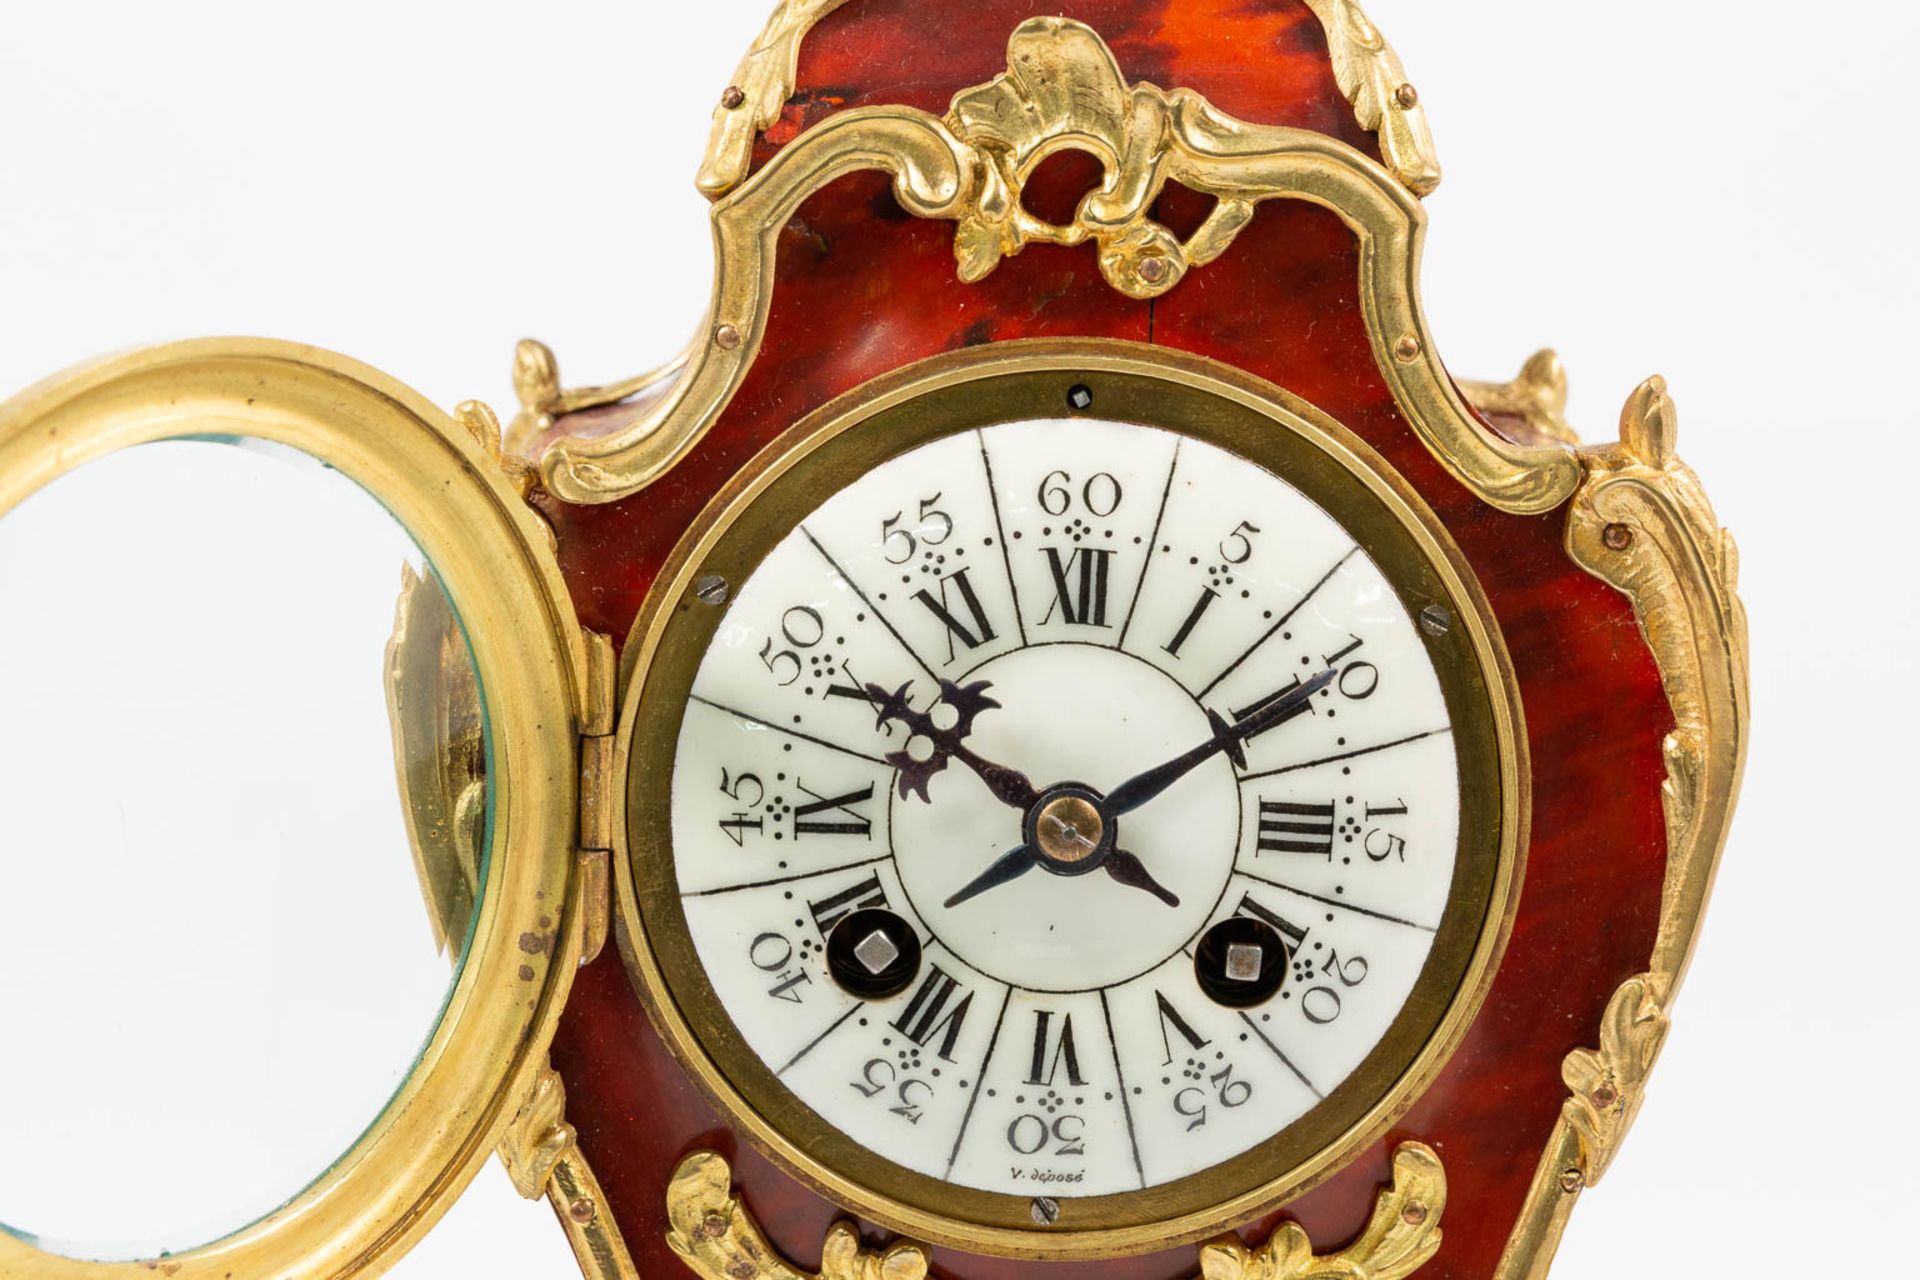 A Table clock made of wood decorated with Tortoise shell and Mount - Image 13 of 16